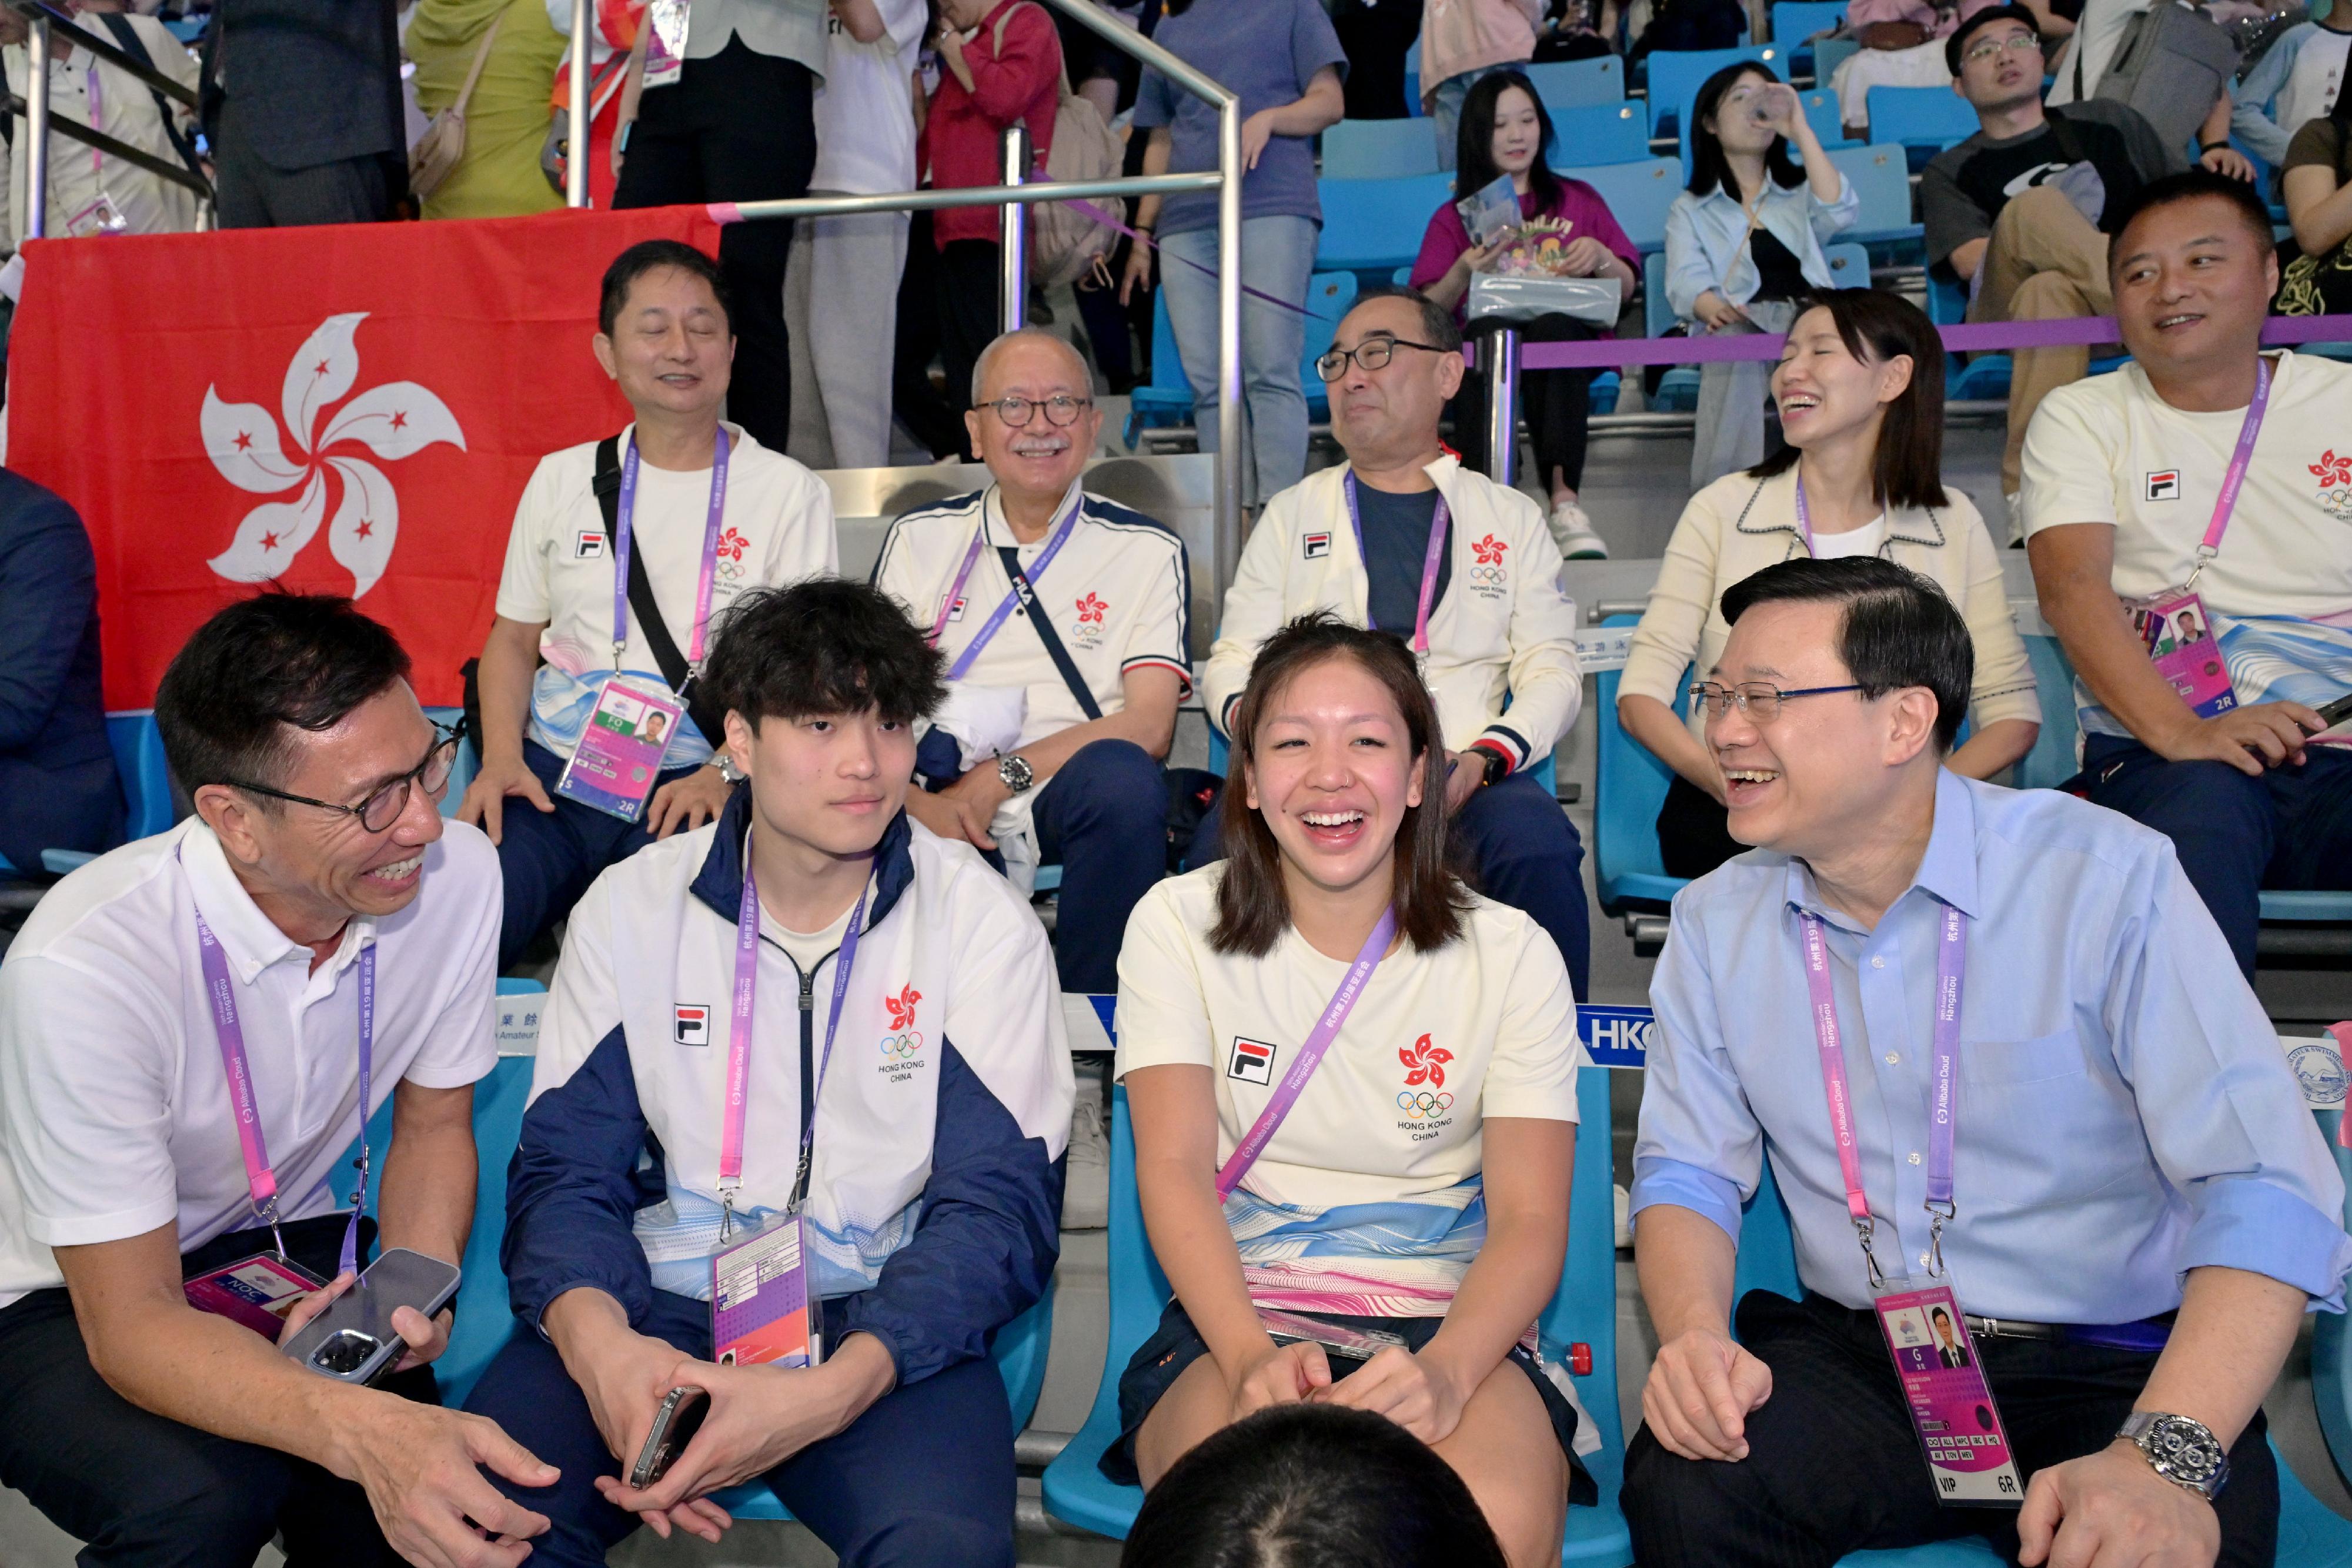 The Chief Executive, Mr John Lee, led a Hong Kong Special Administrative Region Government delegation to Hangzhou and continued his visit programme today (September 24). Photo shows Mr Lee (front row, first right) chatting with Hong Kong athletes.
